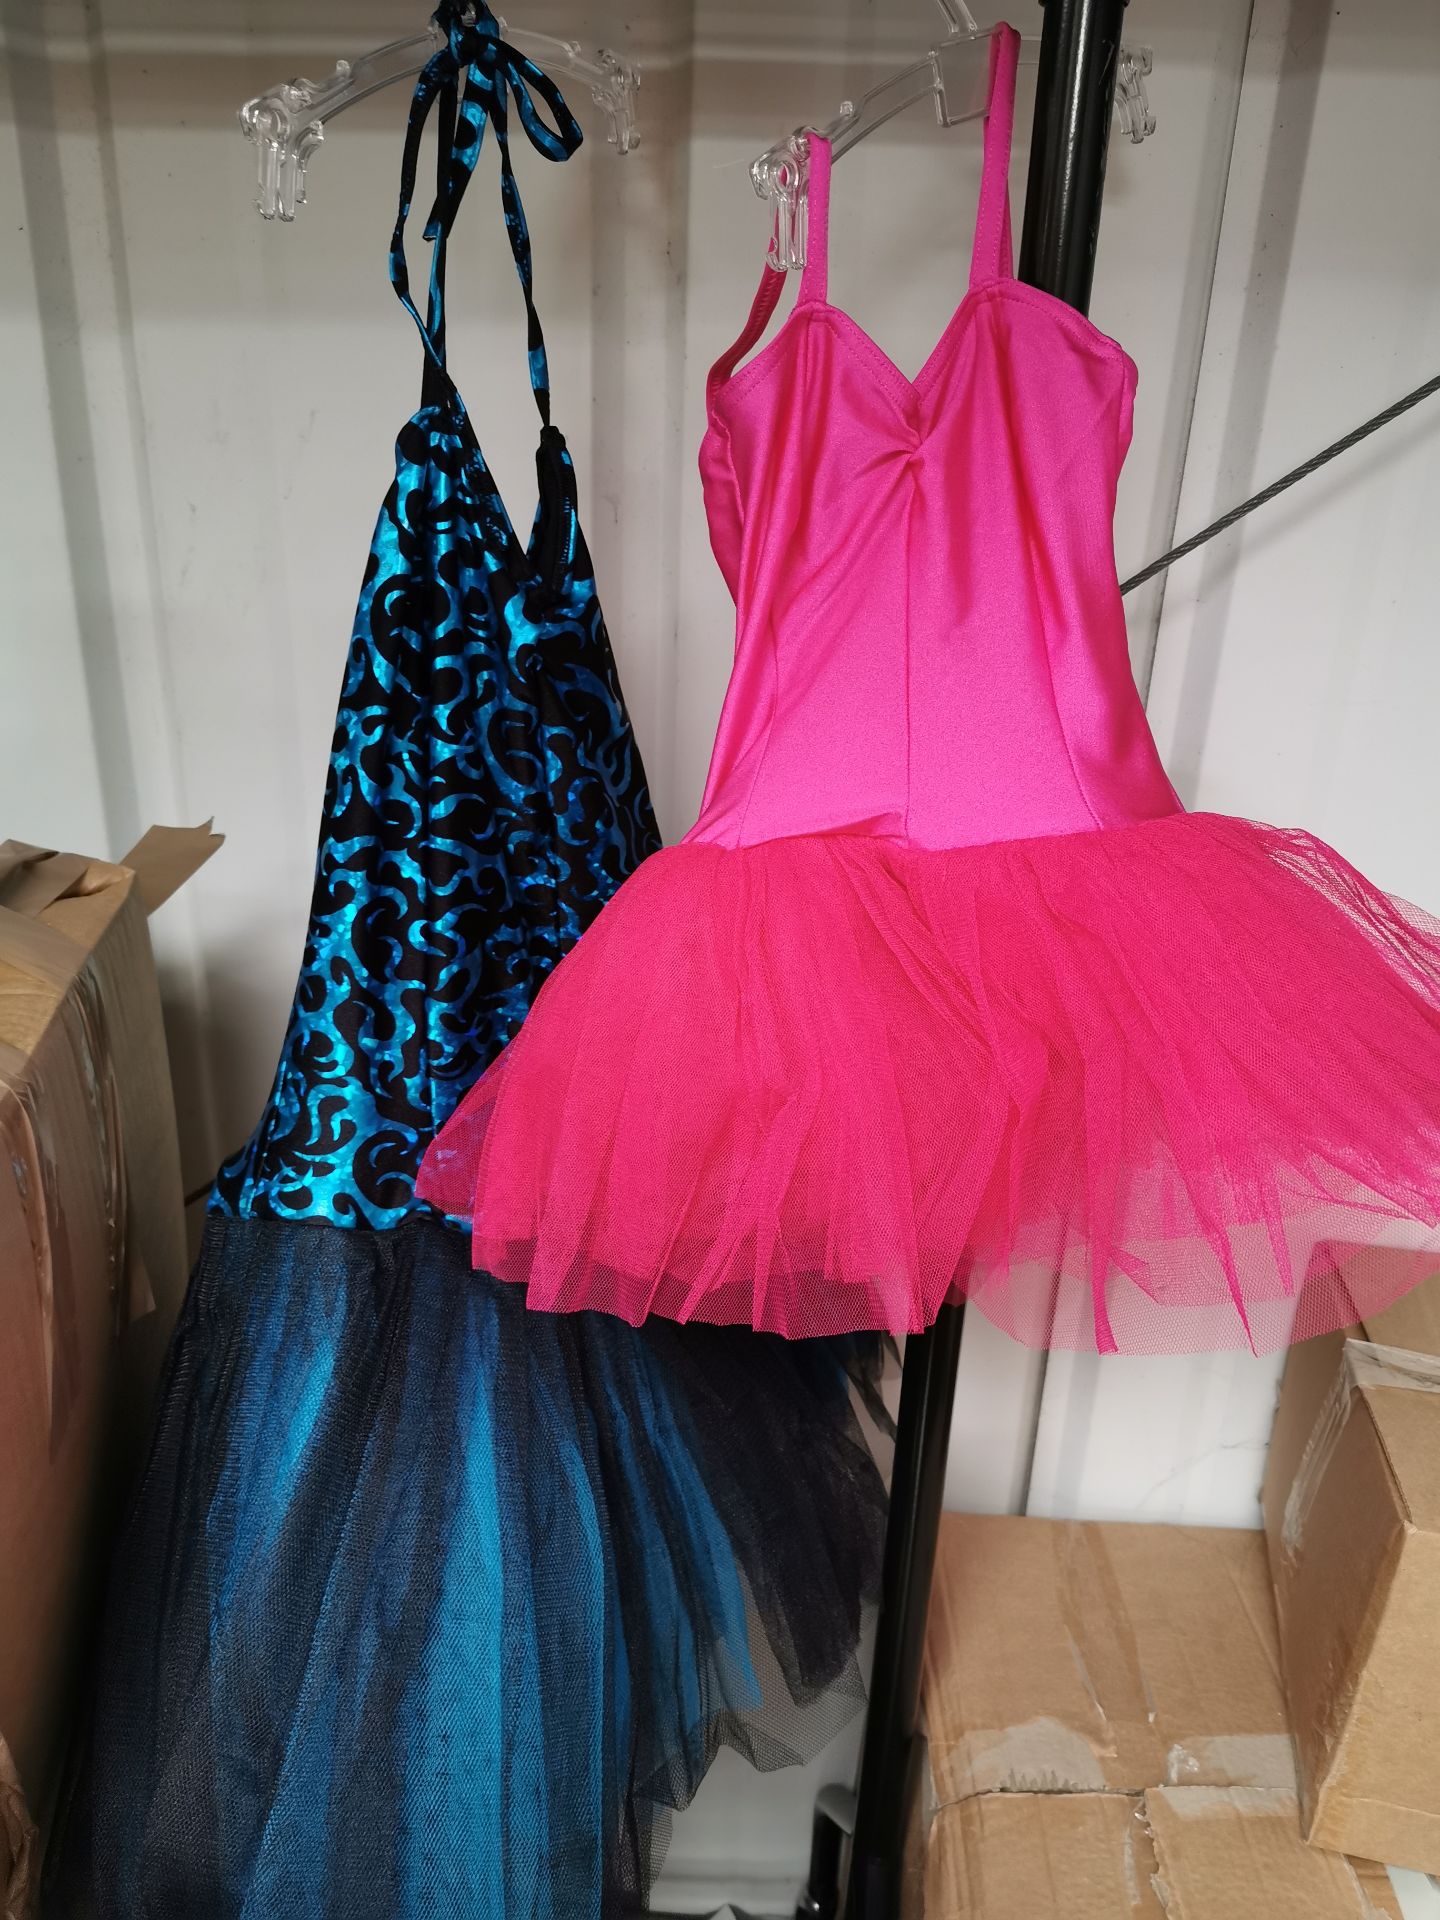 36+ Estimated tutu dresses in a variety of colours,designs and sizes - Image 2 of 3